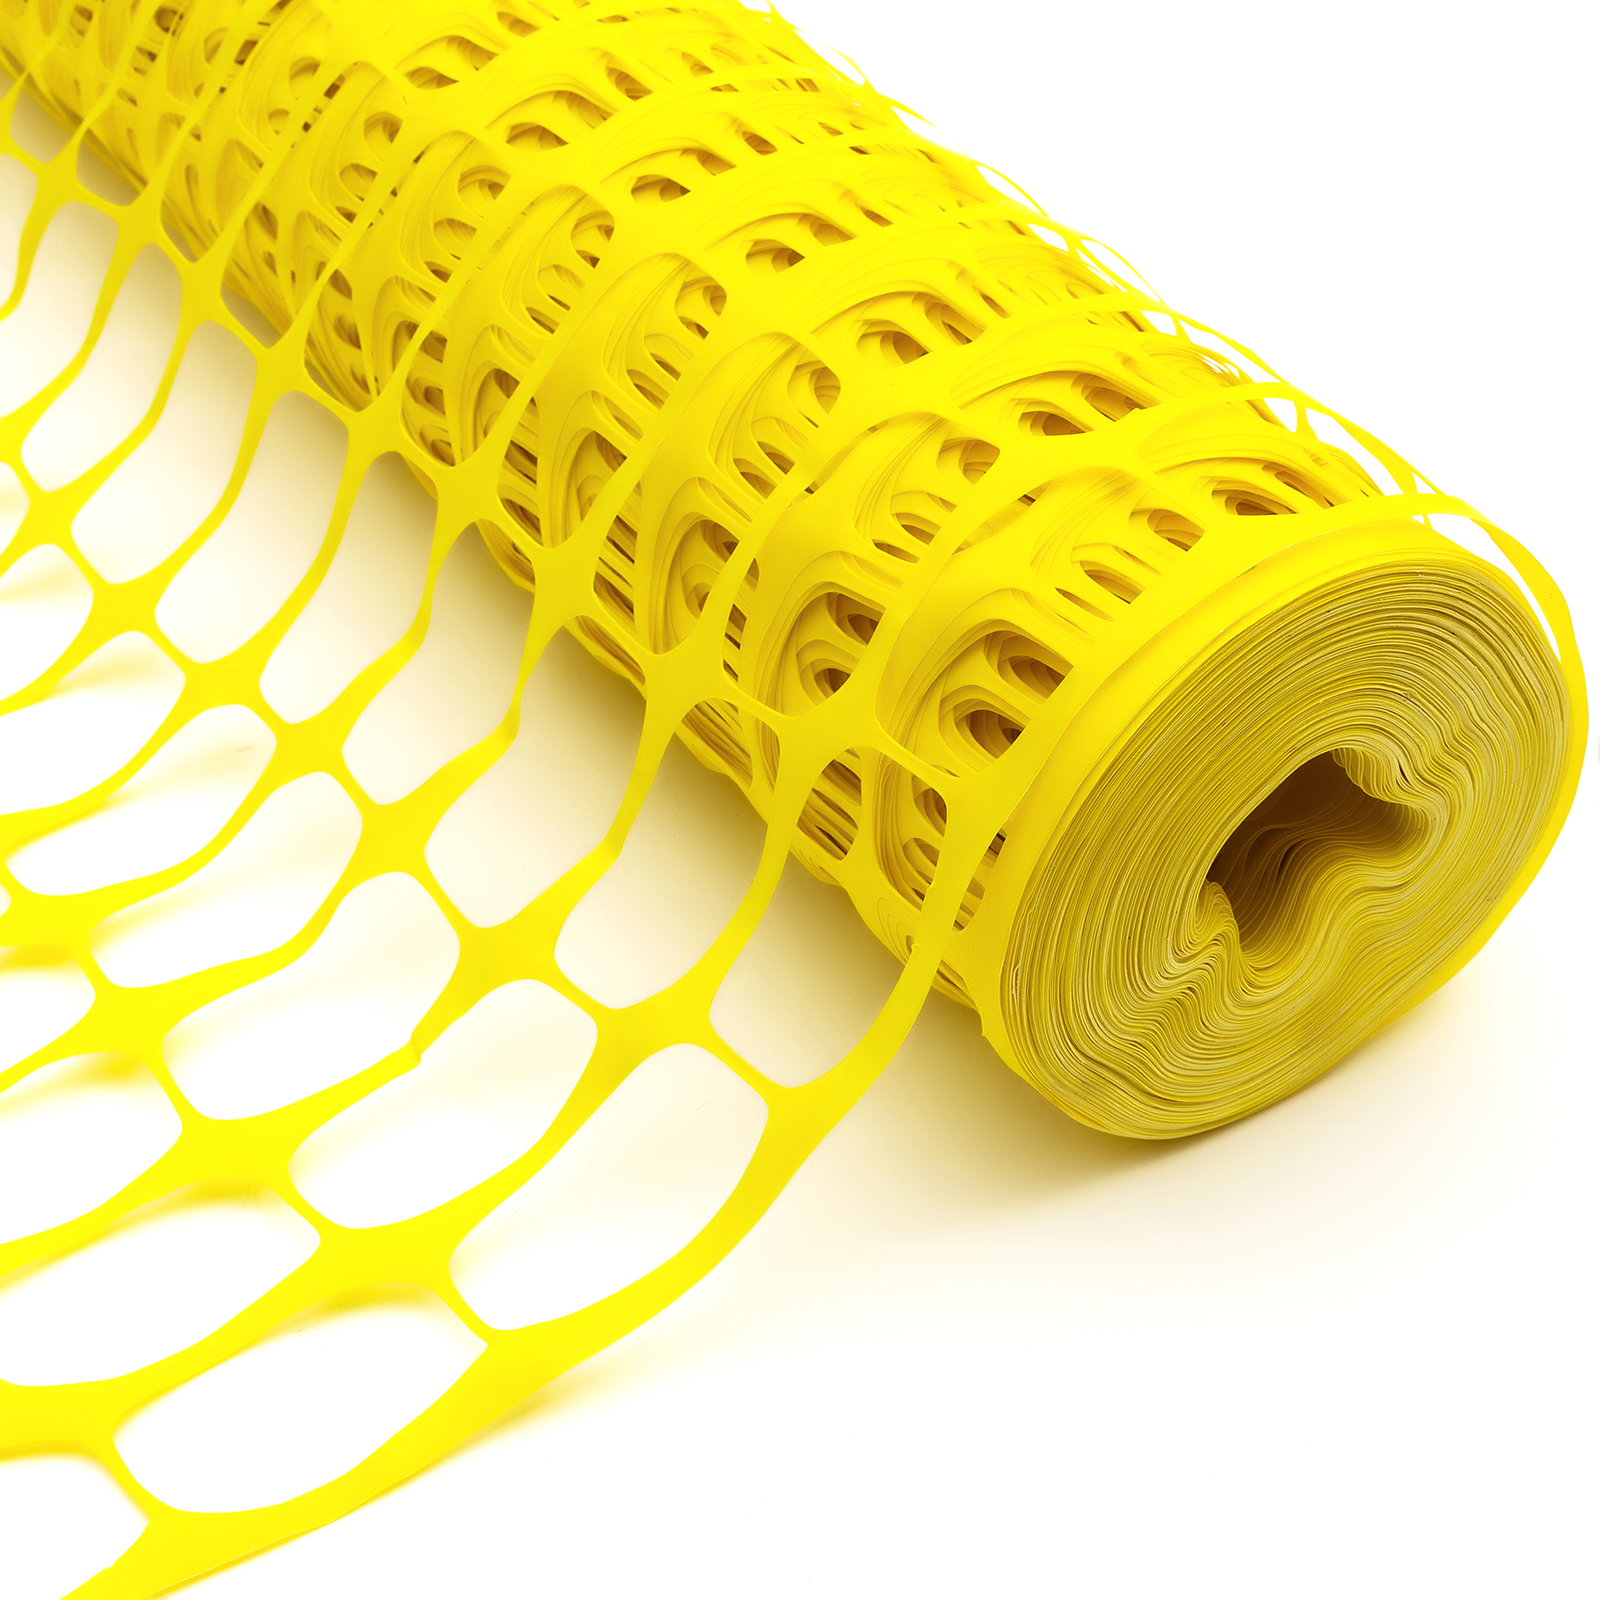 Warrior Yellow Safety Barrier Fencing Mesh Plastic Building Site Fence 25m 50m eBay